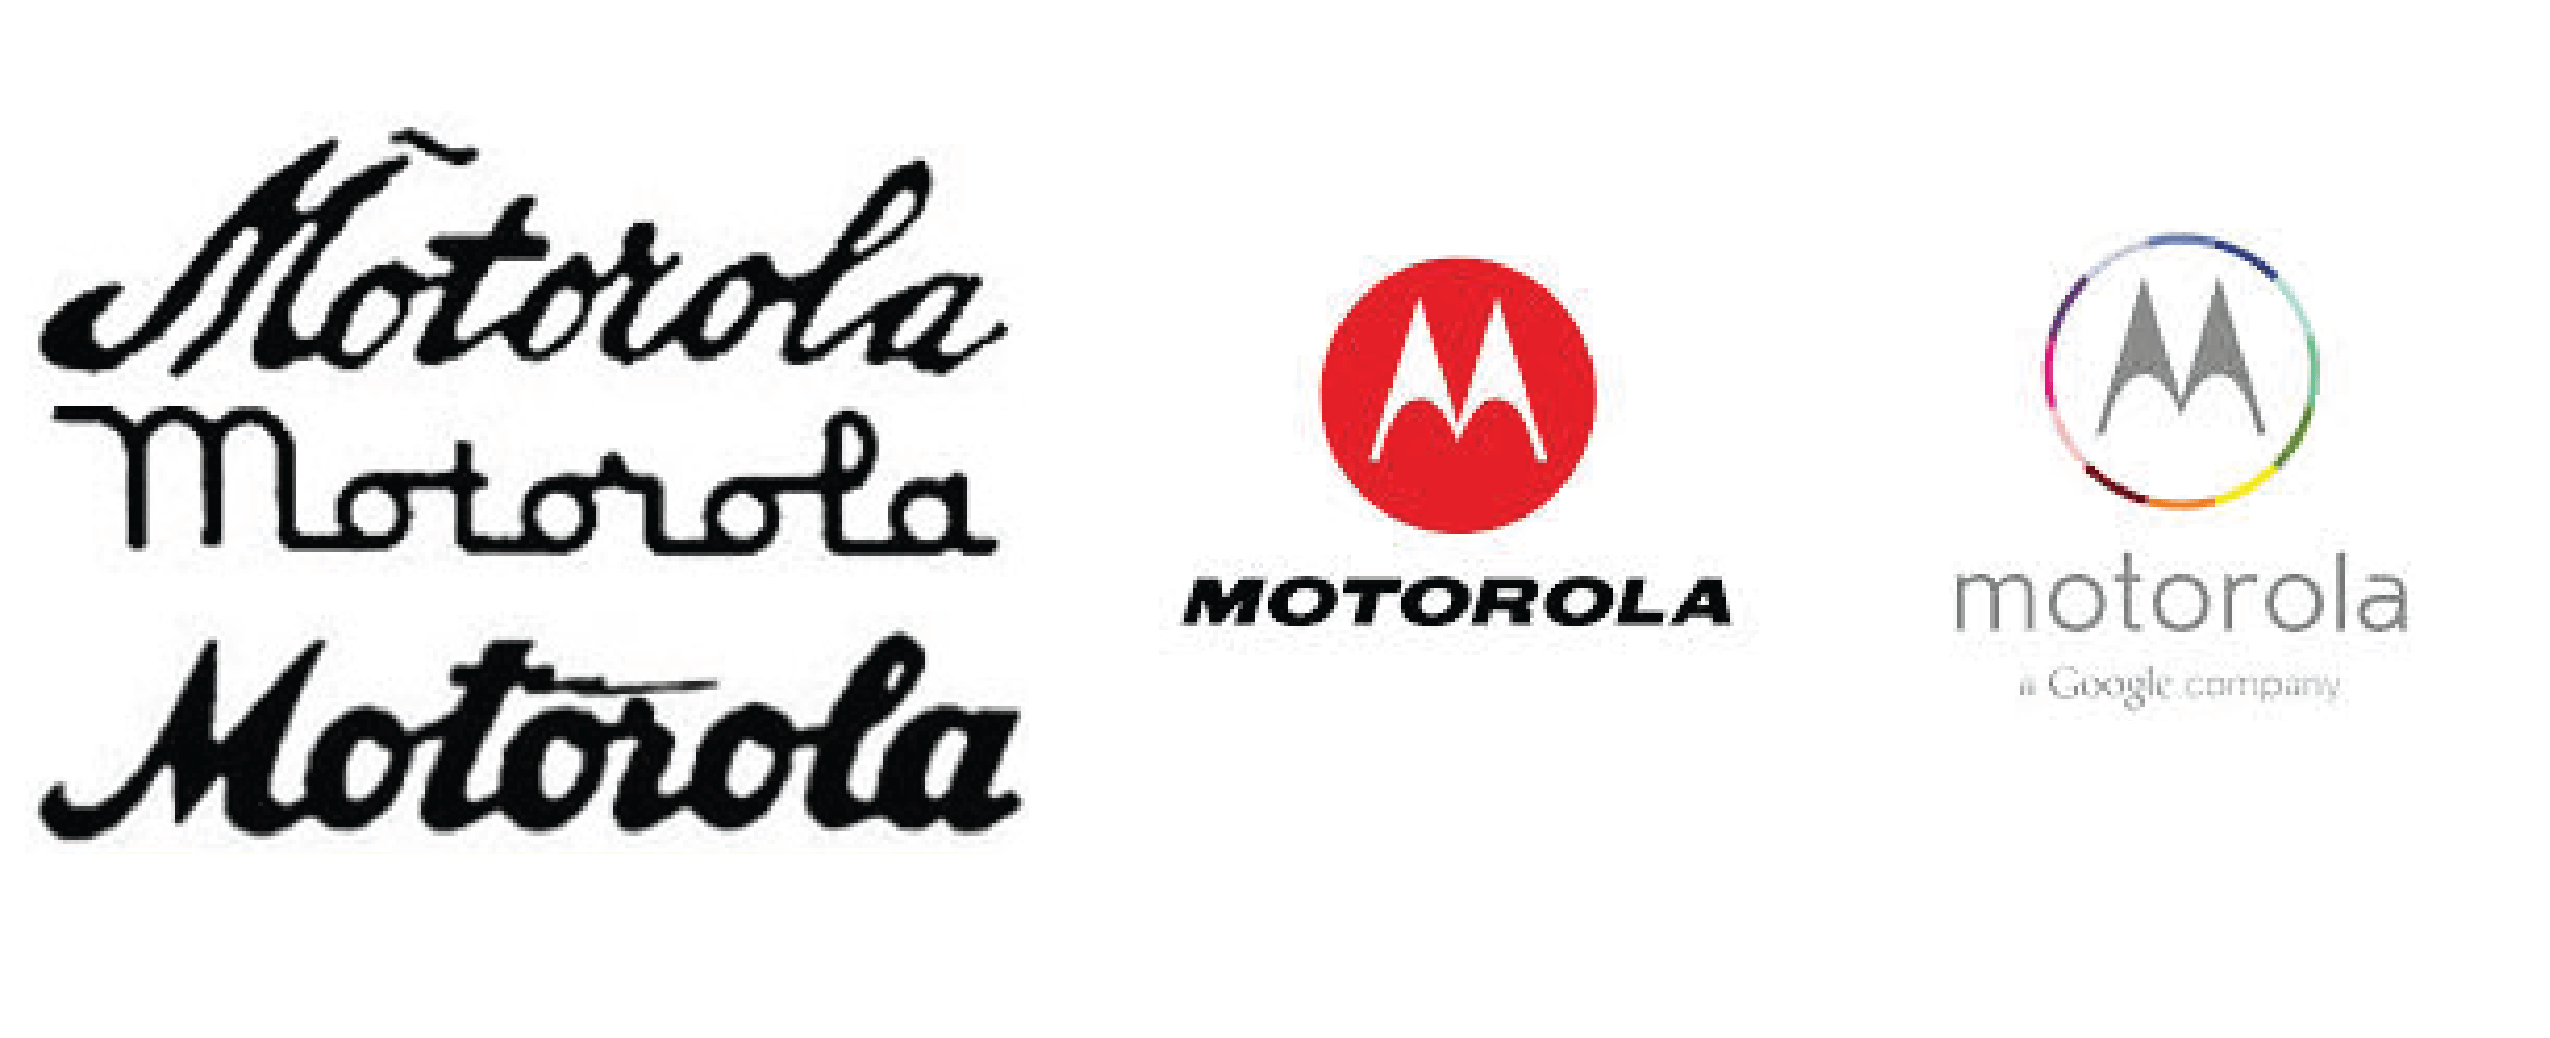 First Motorola Logo - A Look Back at Some Mobile Industry Logos Mobile Trends